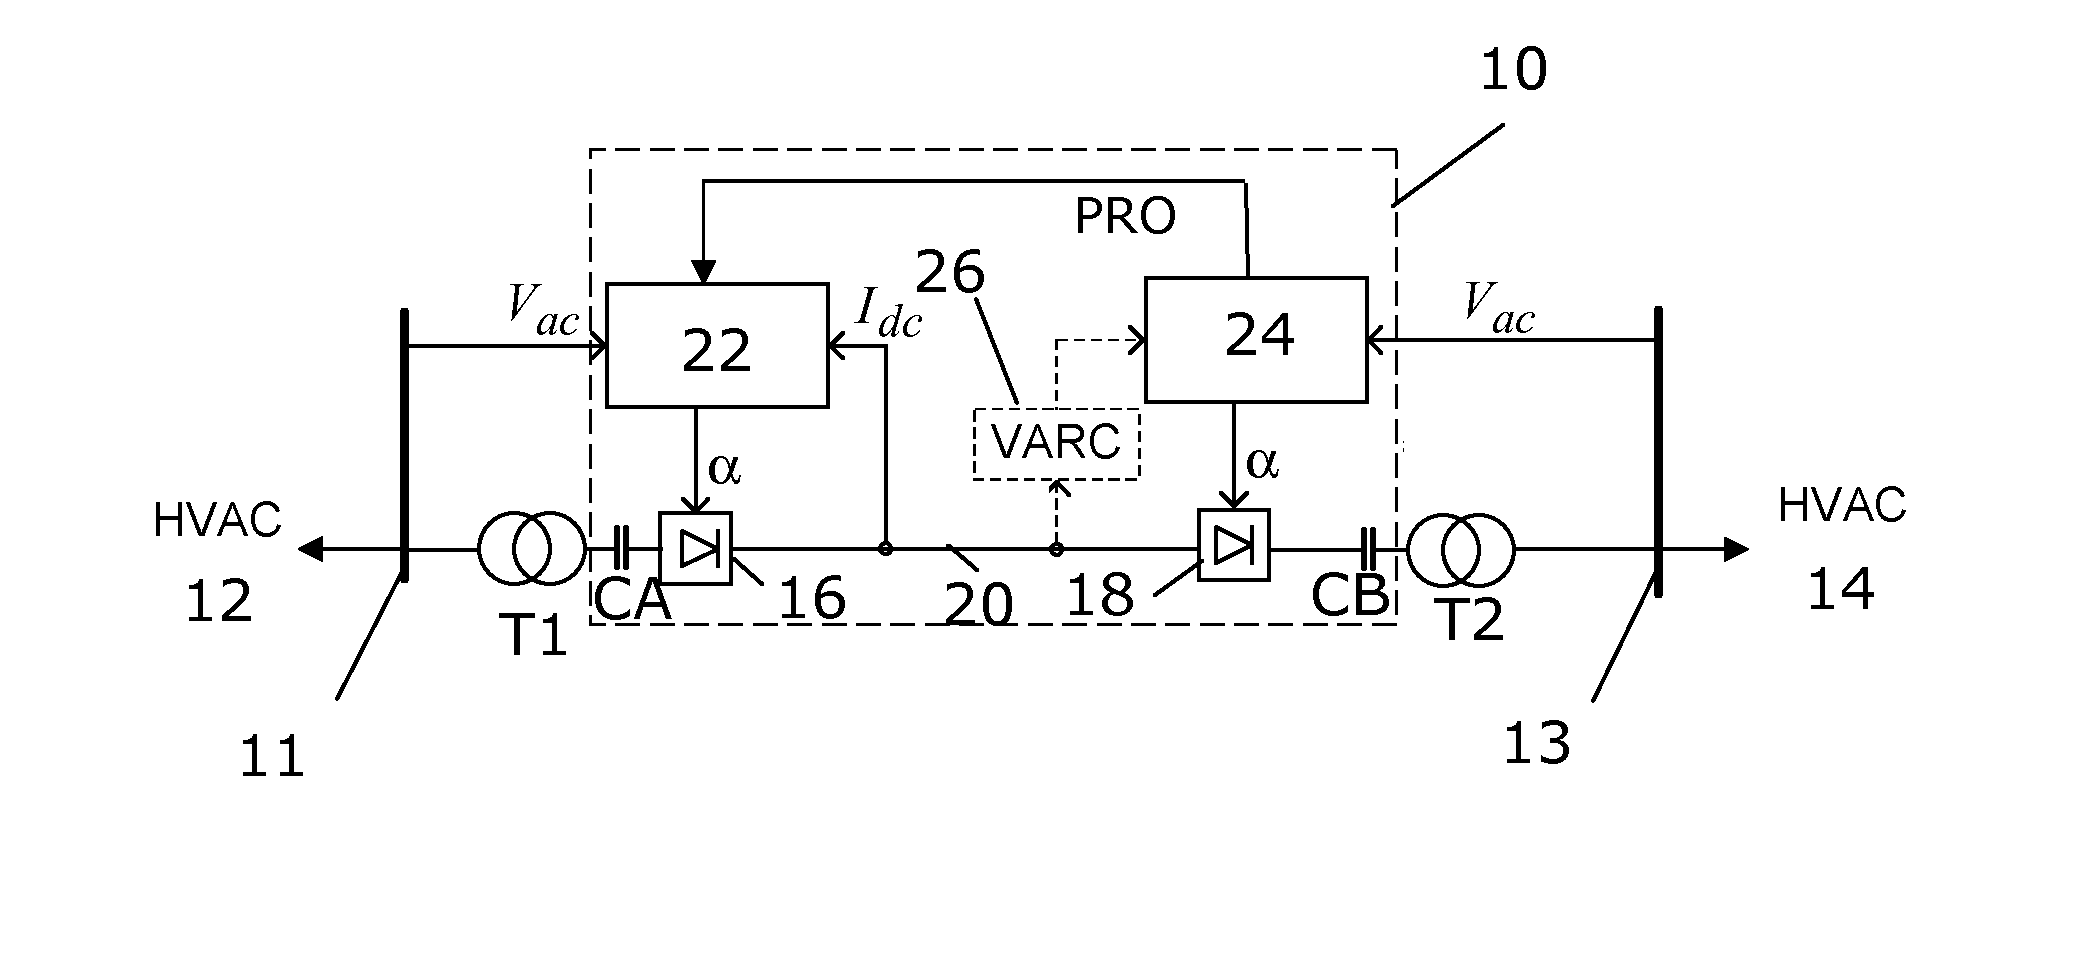 Controlling an inverter device of a high voltage DC system for supporting an ac system